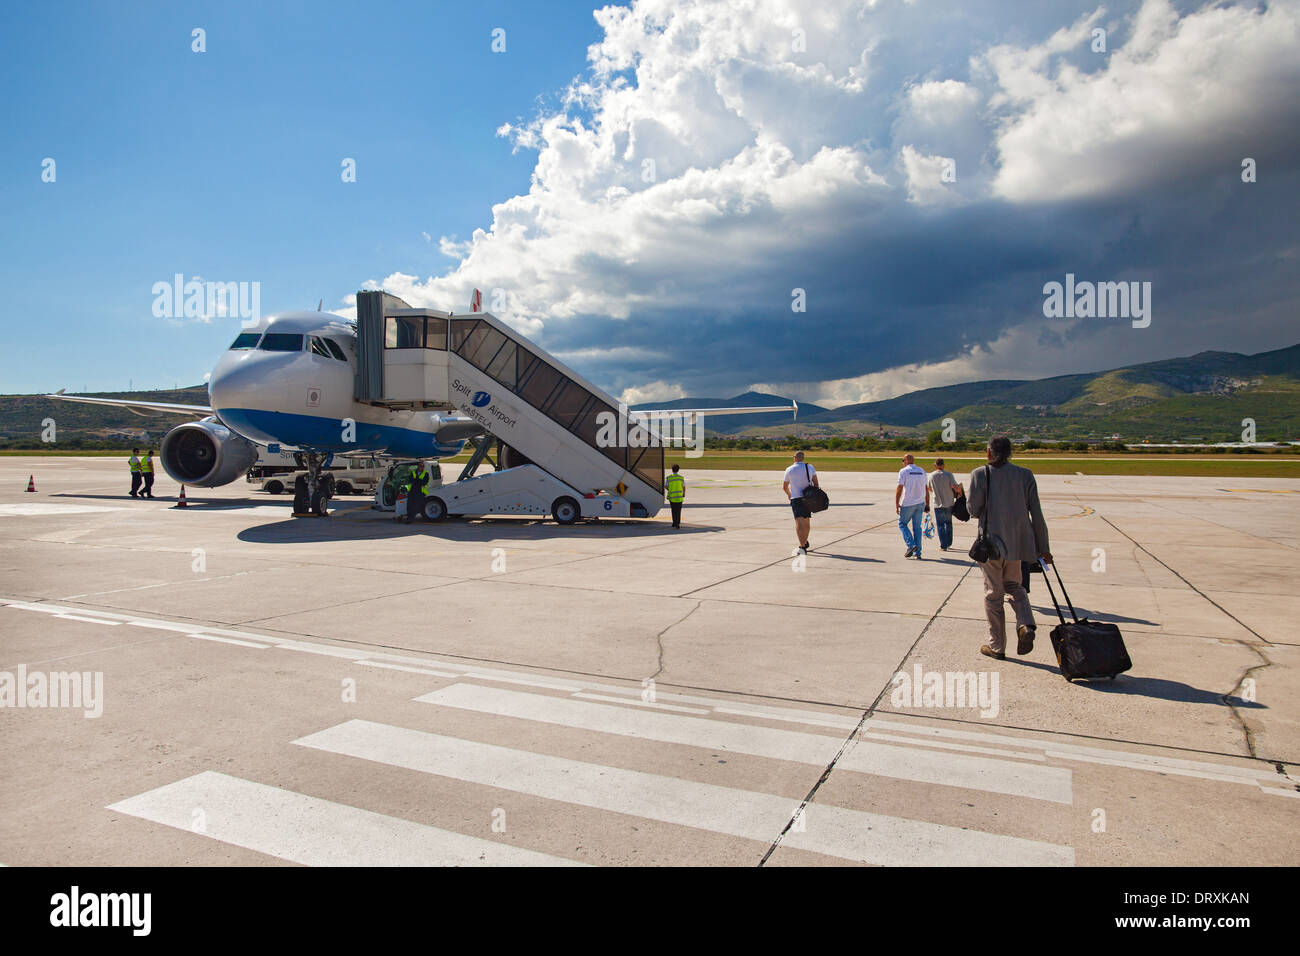 SPLIT, CROATIA - JUN 6: Croatia Airlines Airbus A319 parked on a runway of Split Airport during boarding on June 6, 2013 Stock Photo